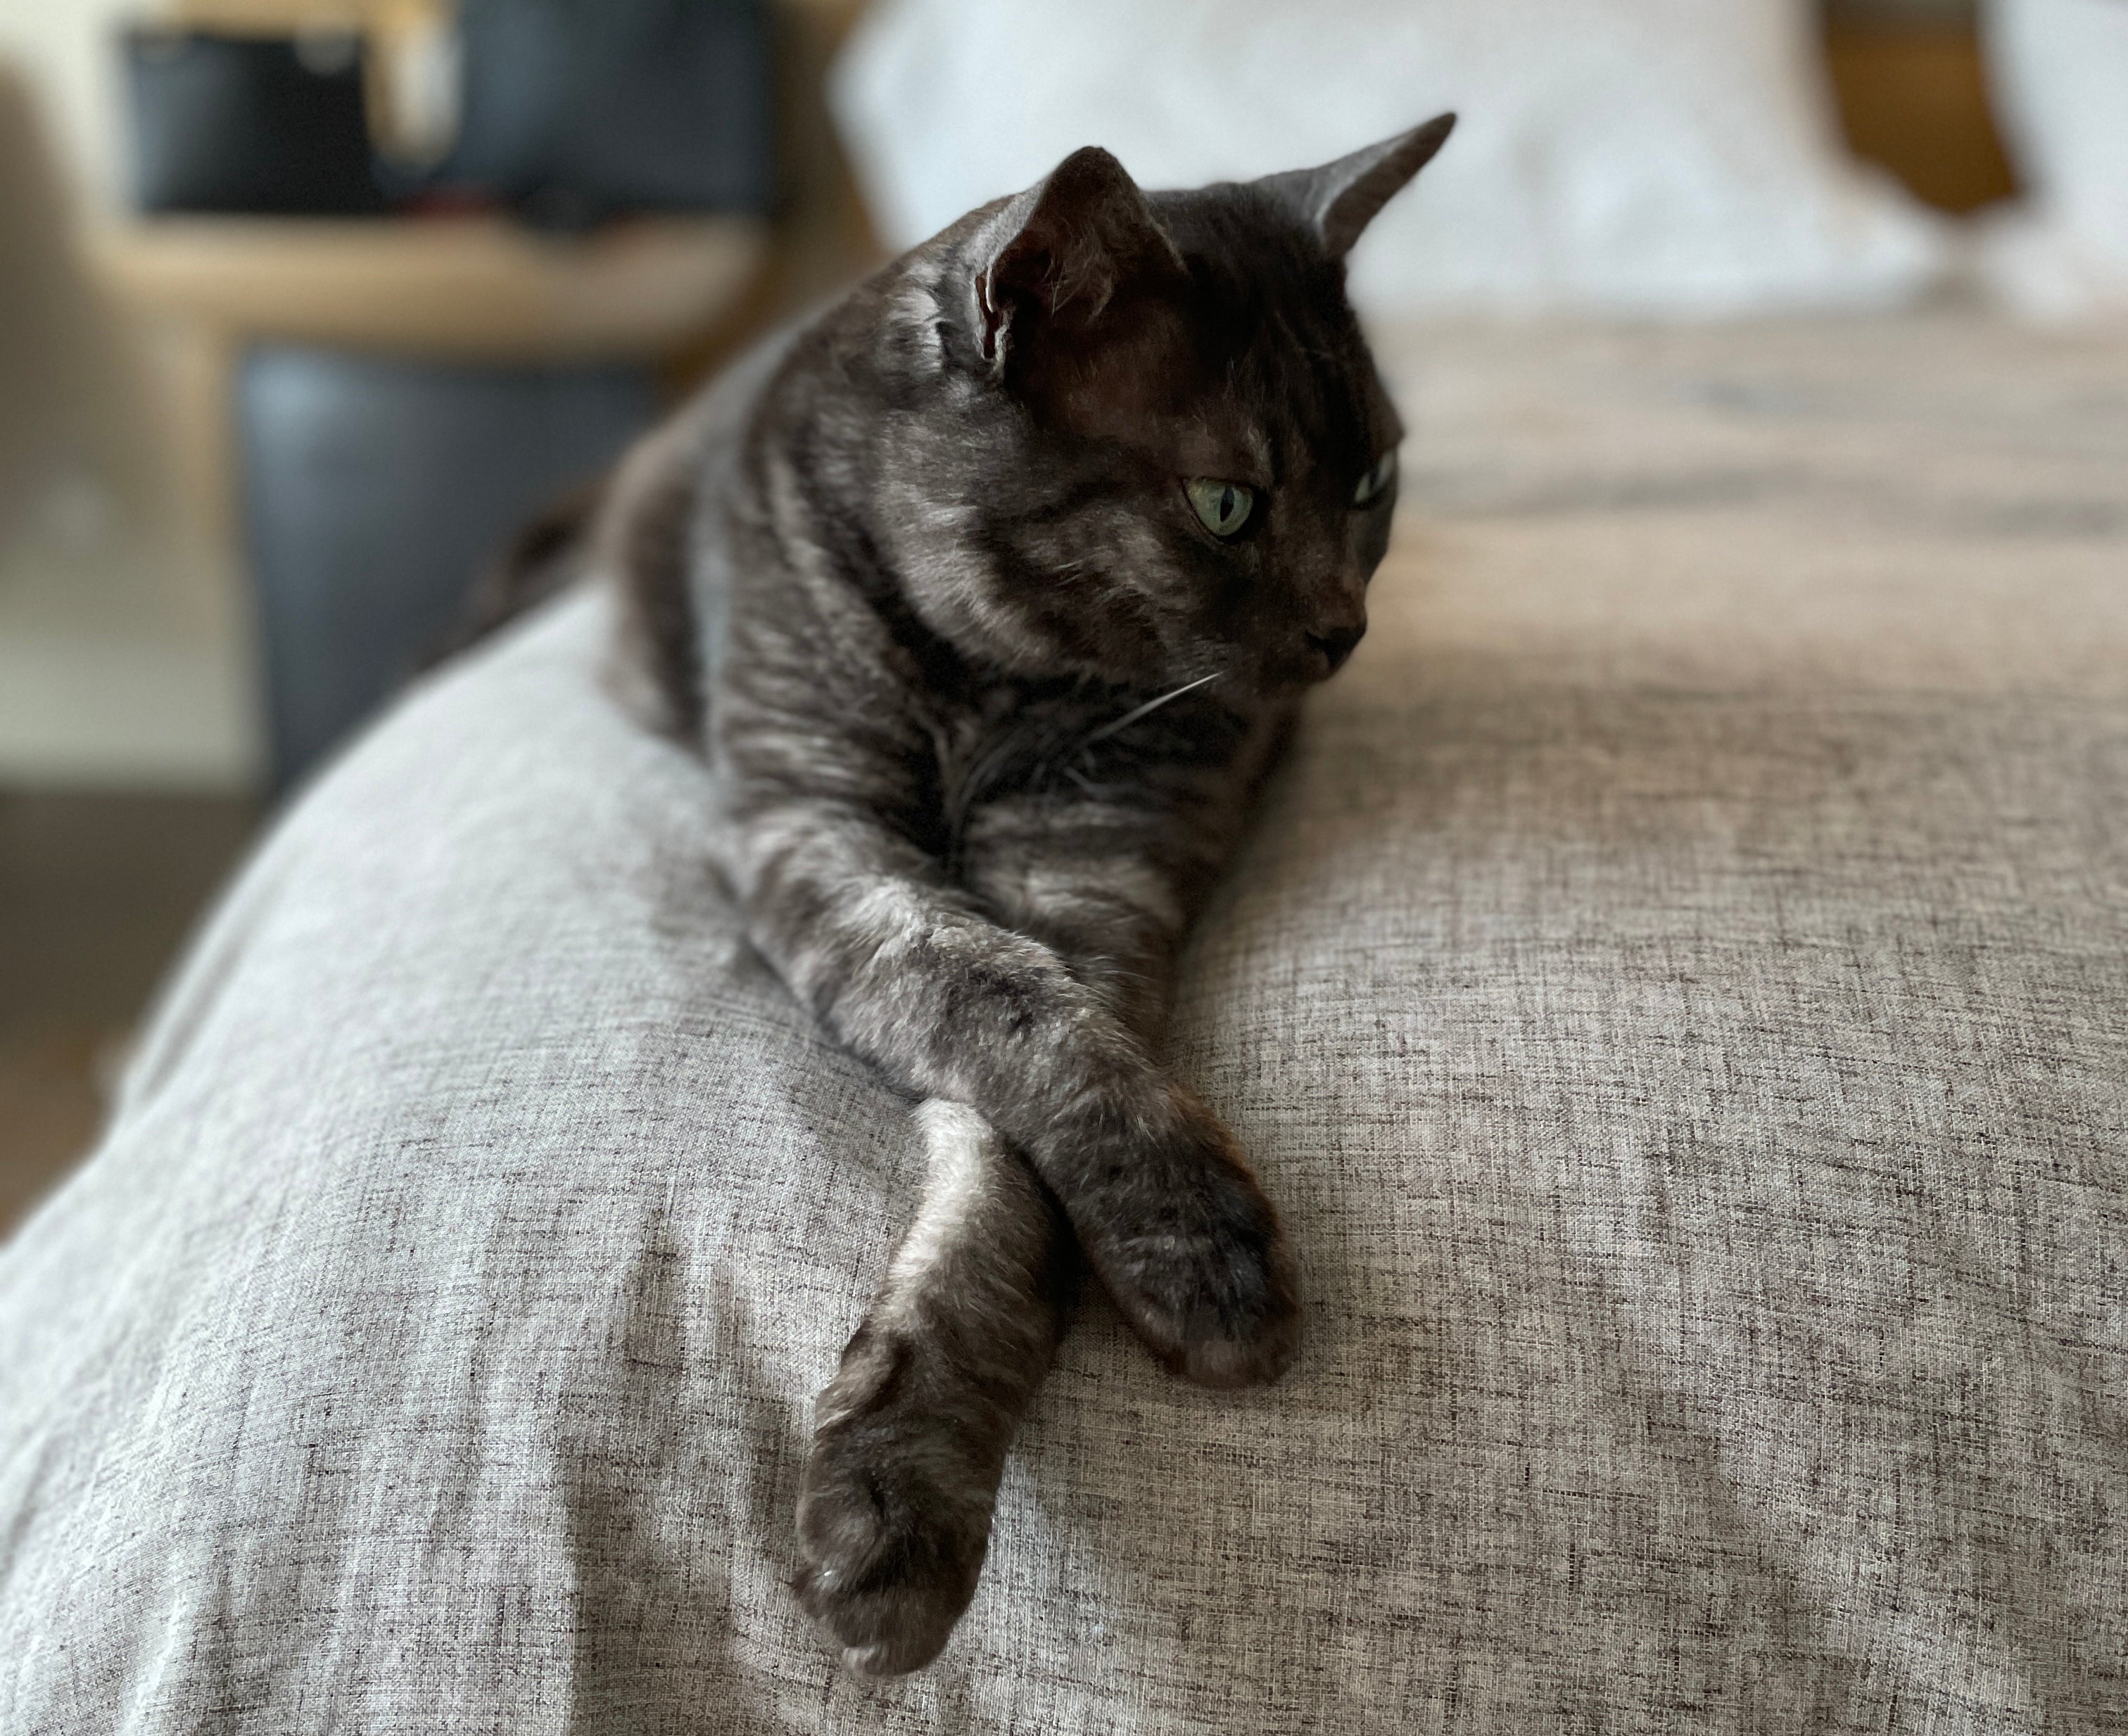 10 Life Lessons We Can Learn From Our Cats